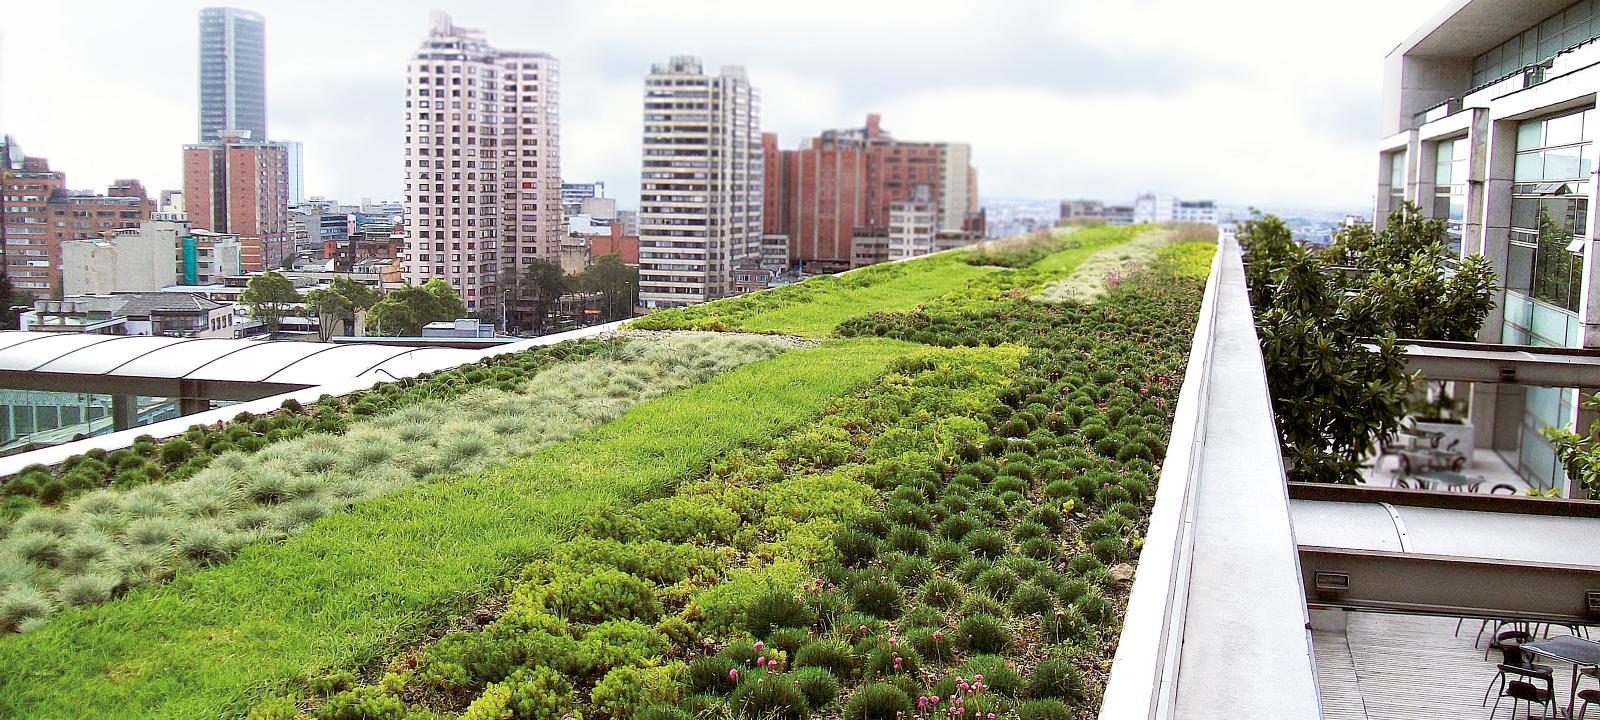 Extensive green roof in a big city